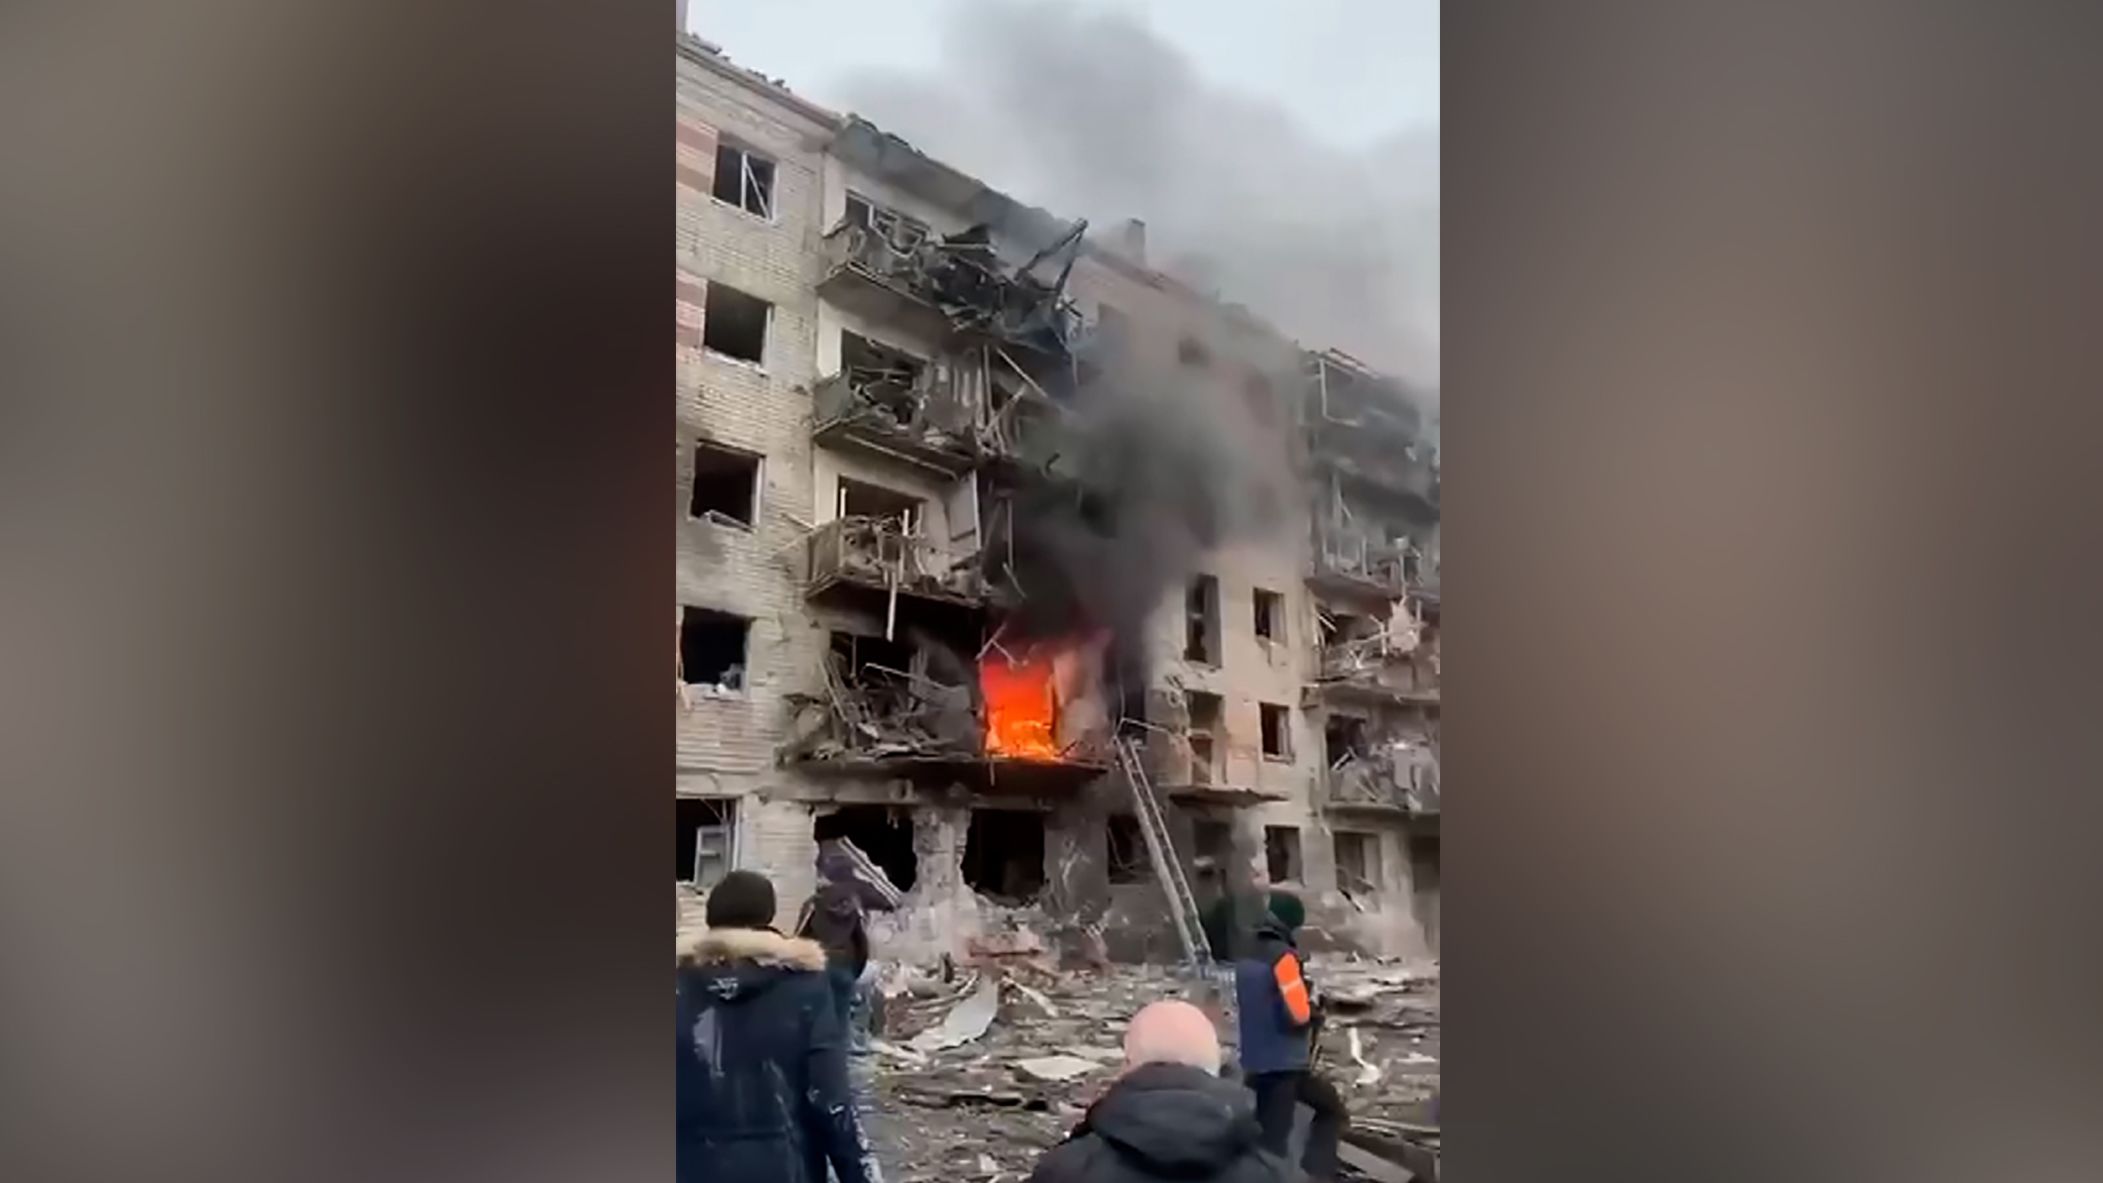 First responders fight a fire at an apartment complex hit by Russian military strikes in Kharkiv on Tuesday.